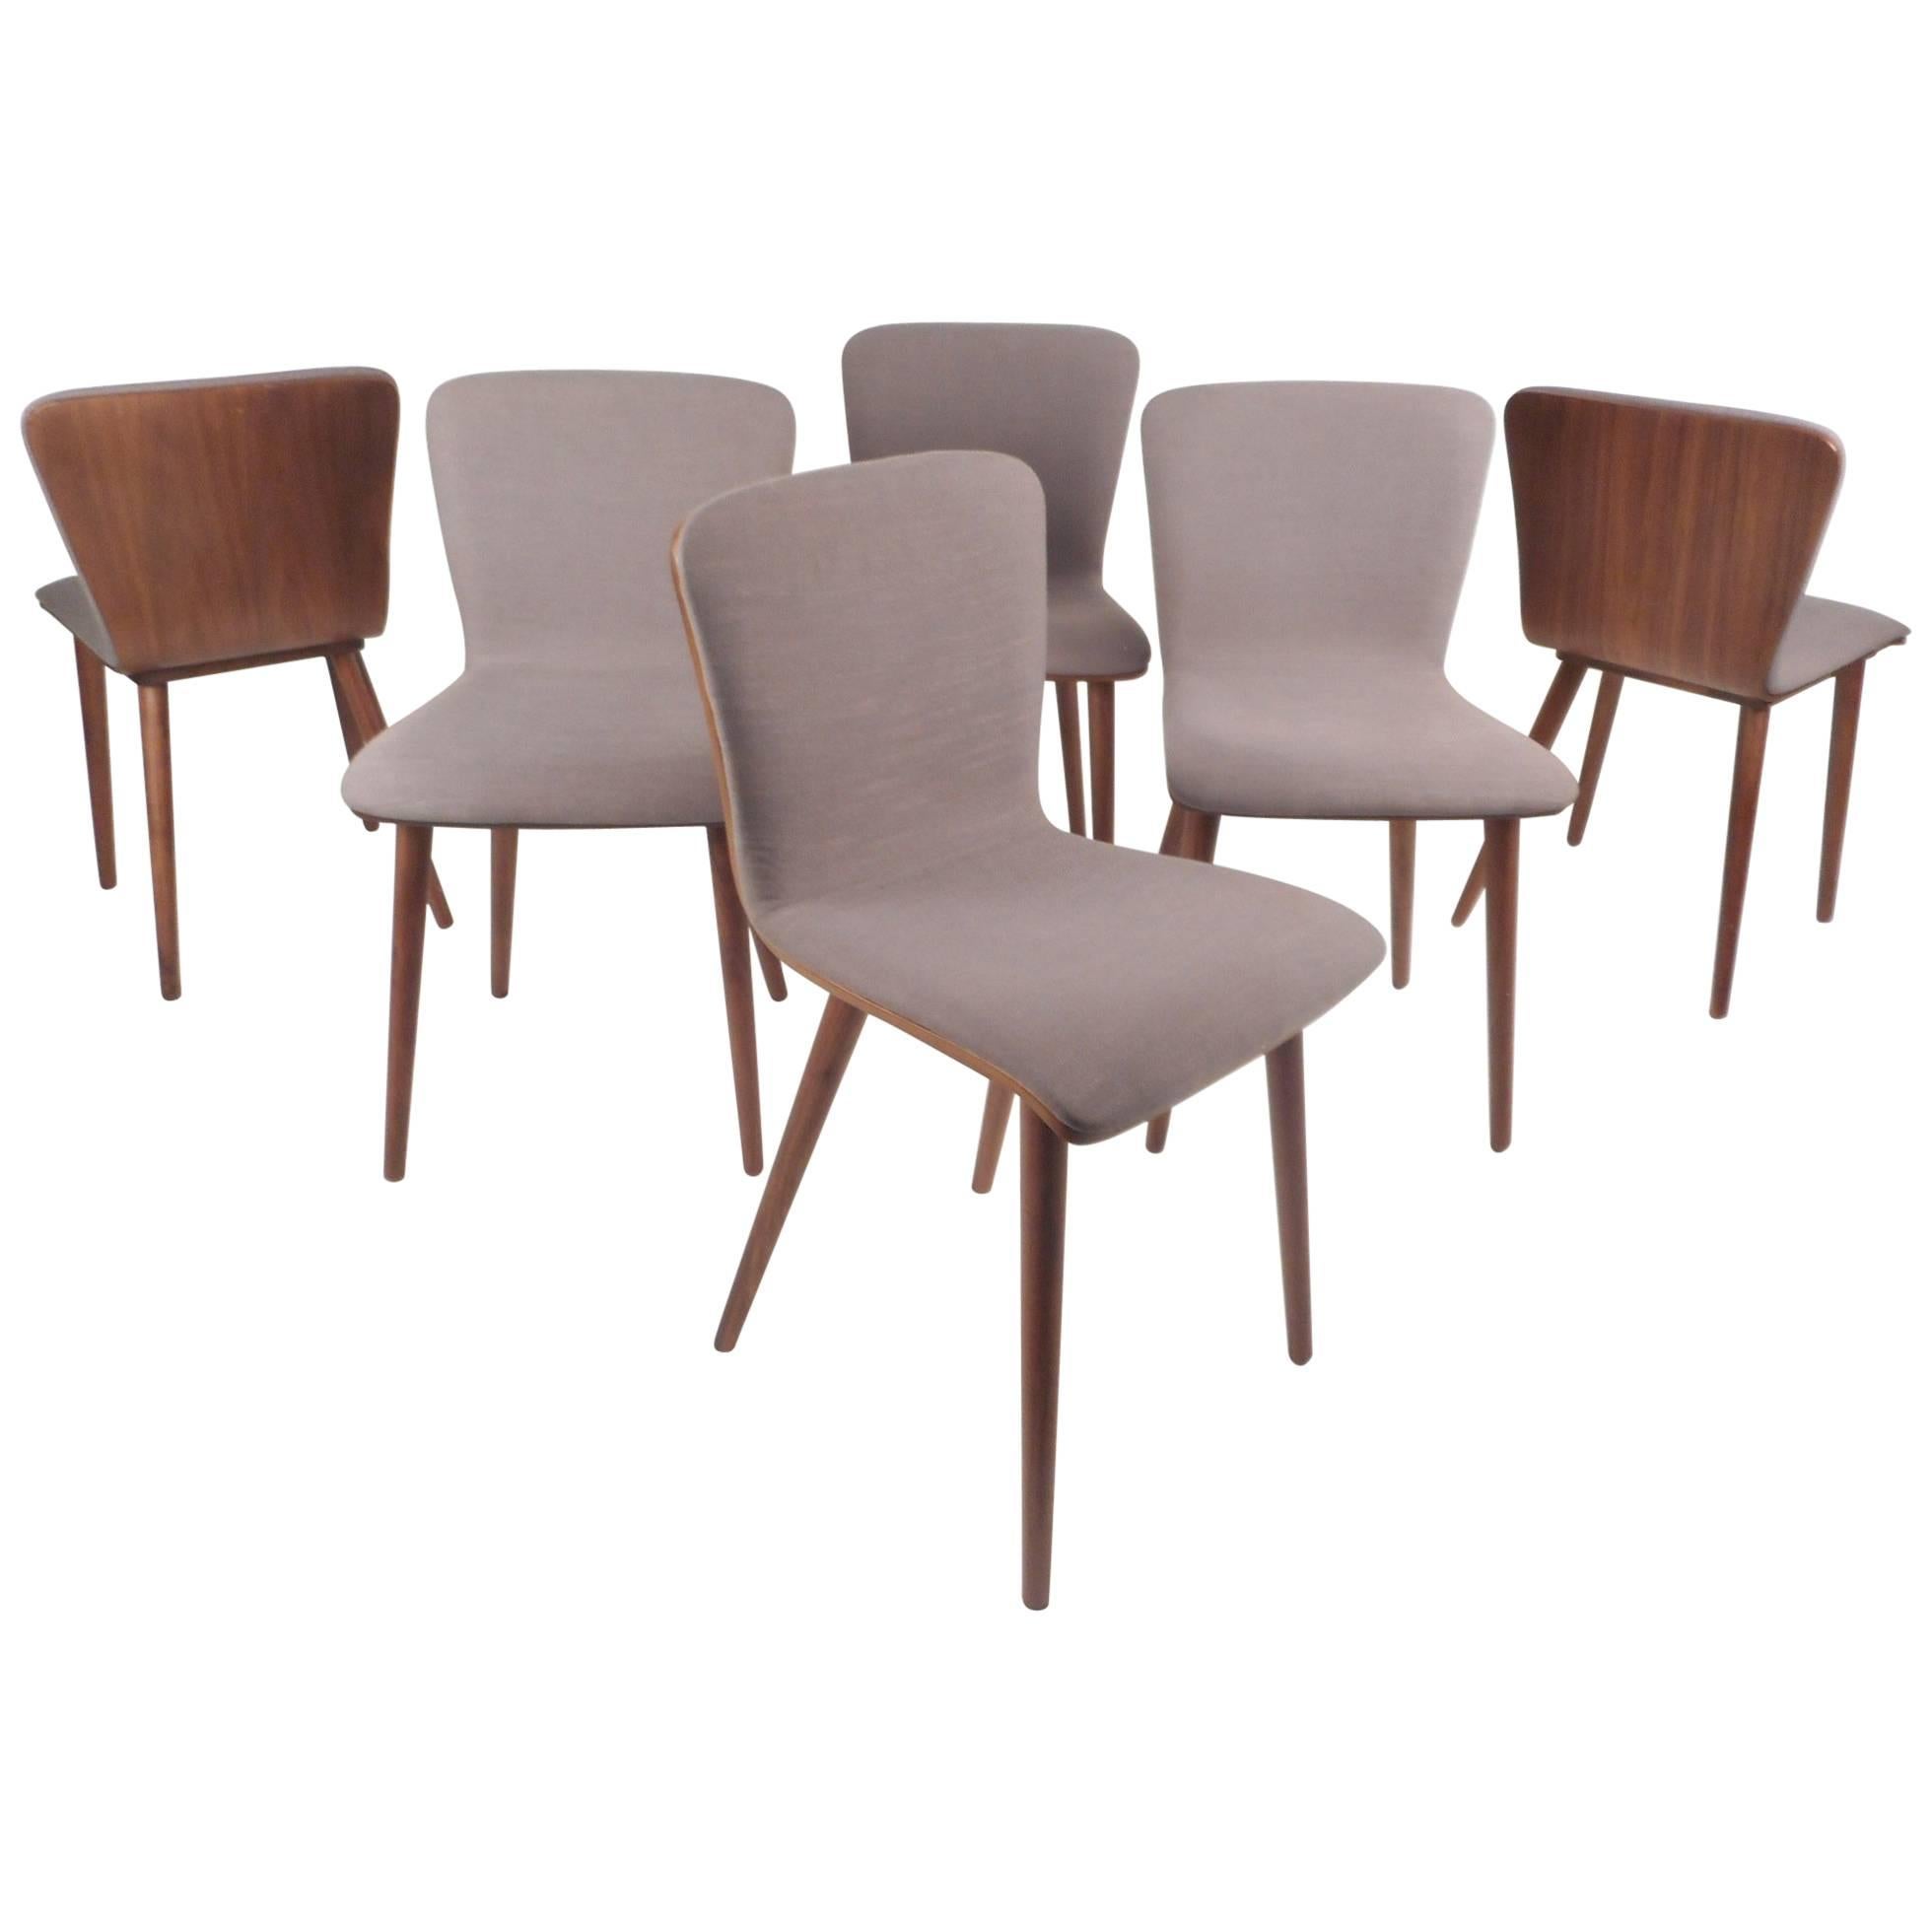 Set of Six Contemporary Modern Dining Chairs